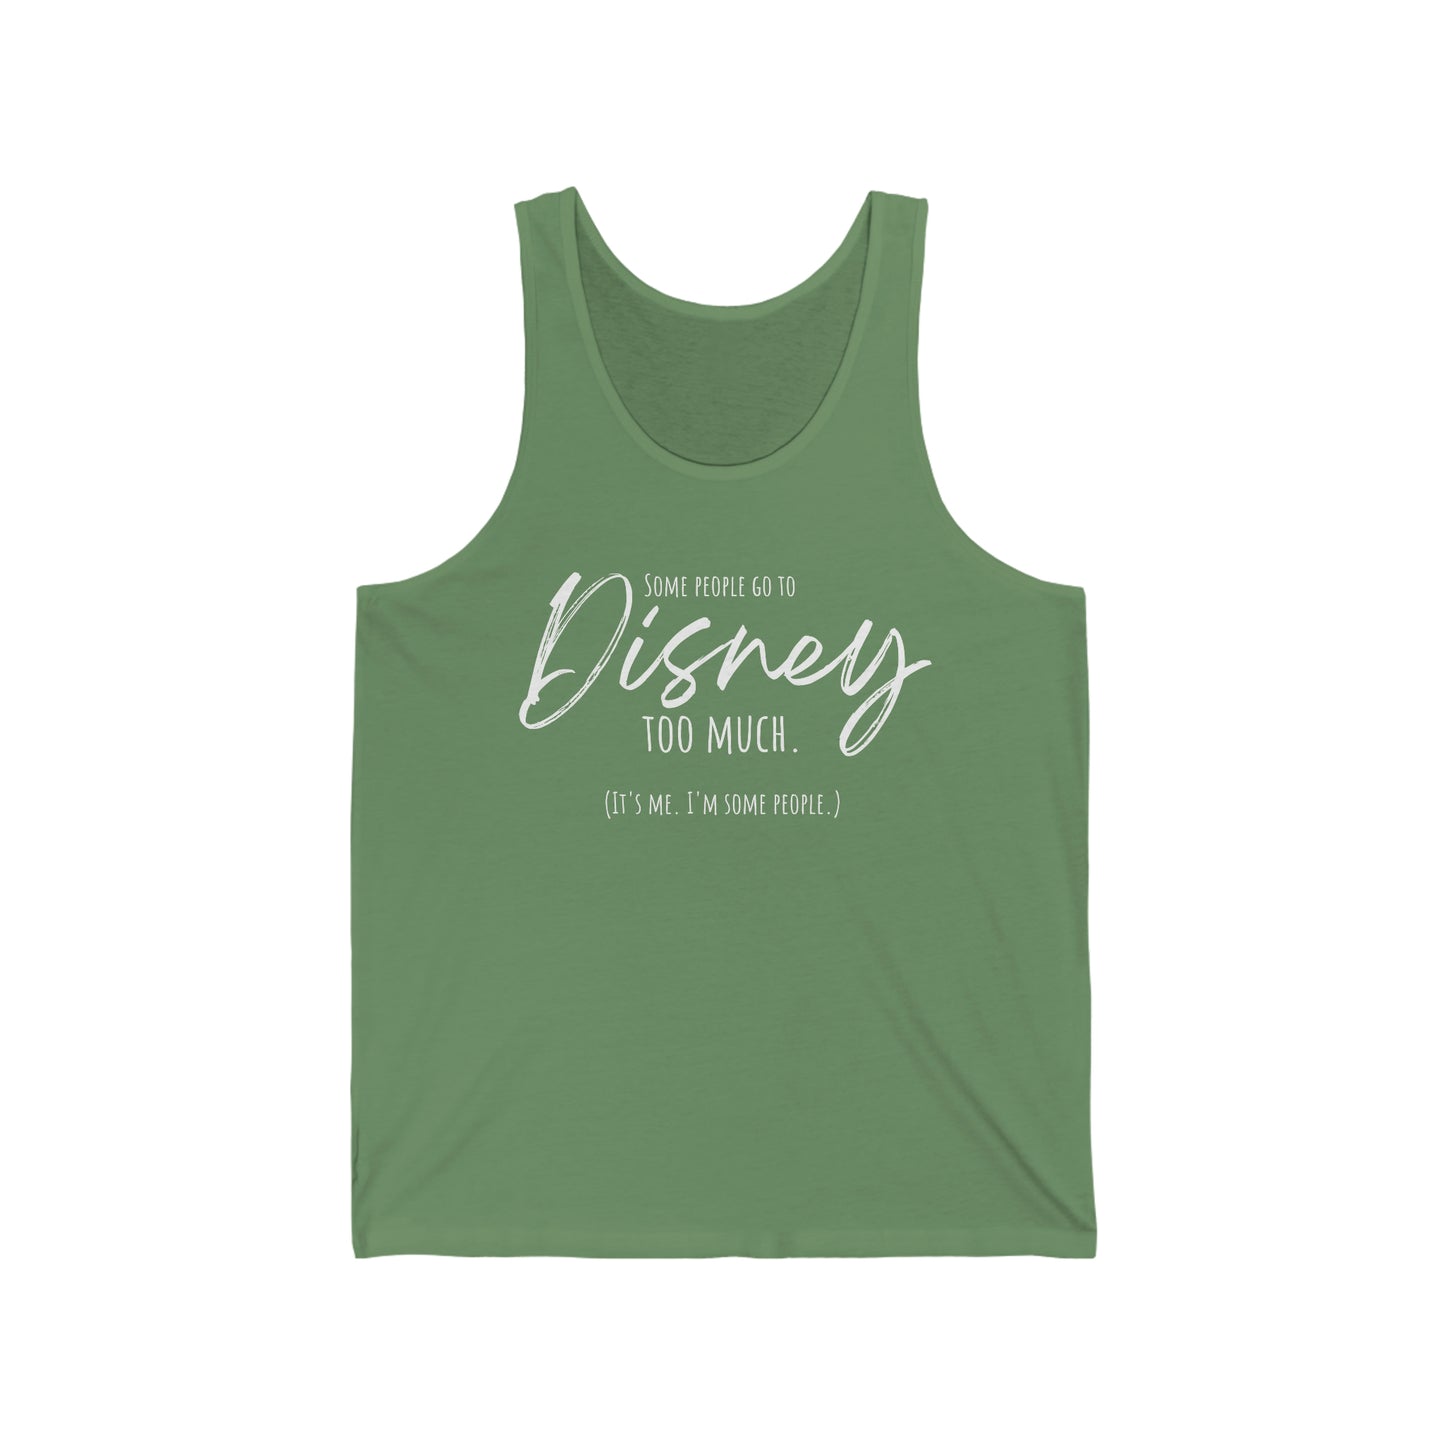 Some People Go To Disney Too Much - Unisex Jersey Tank